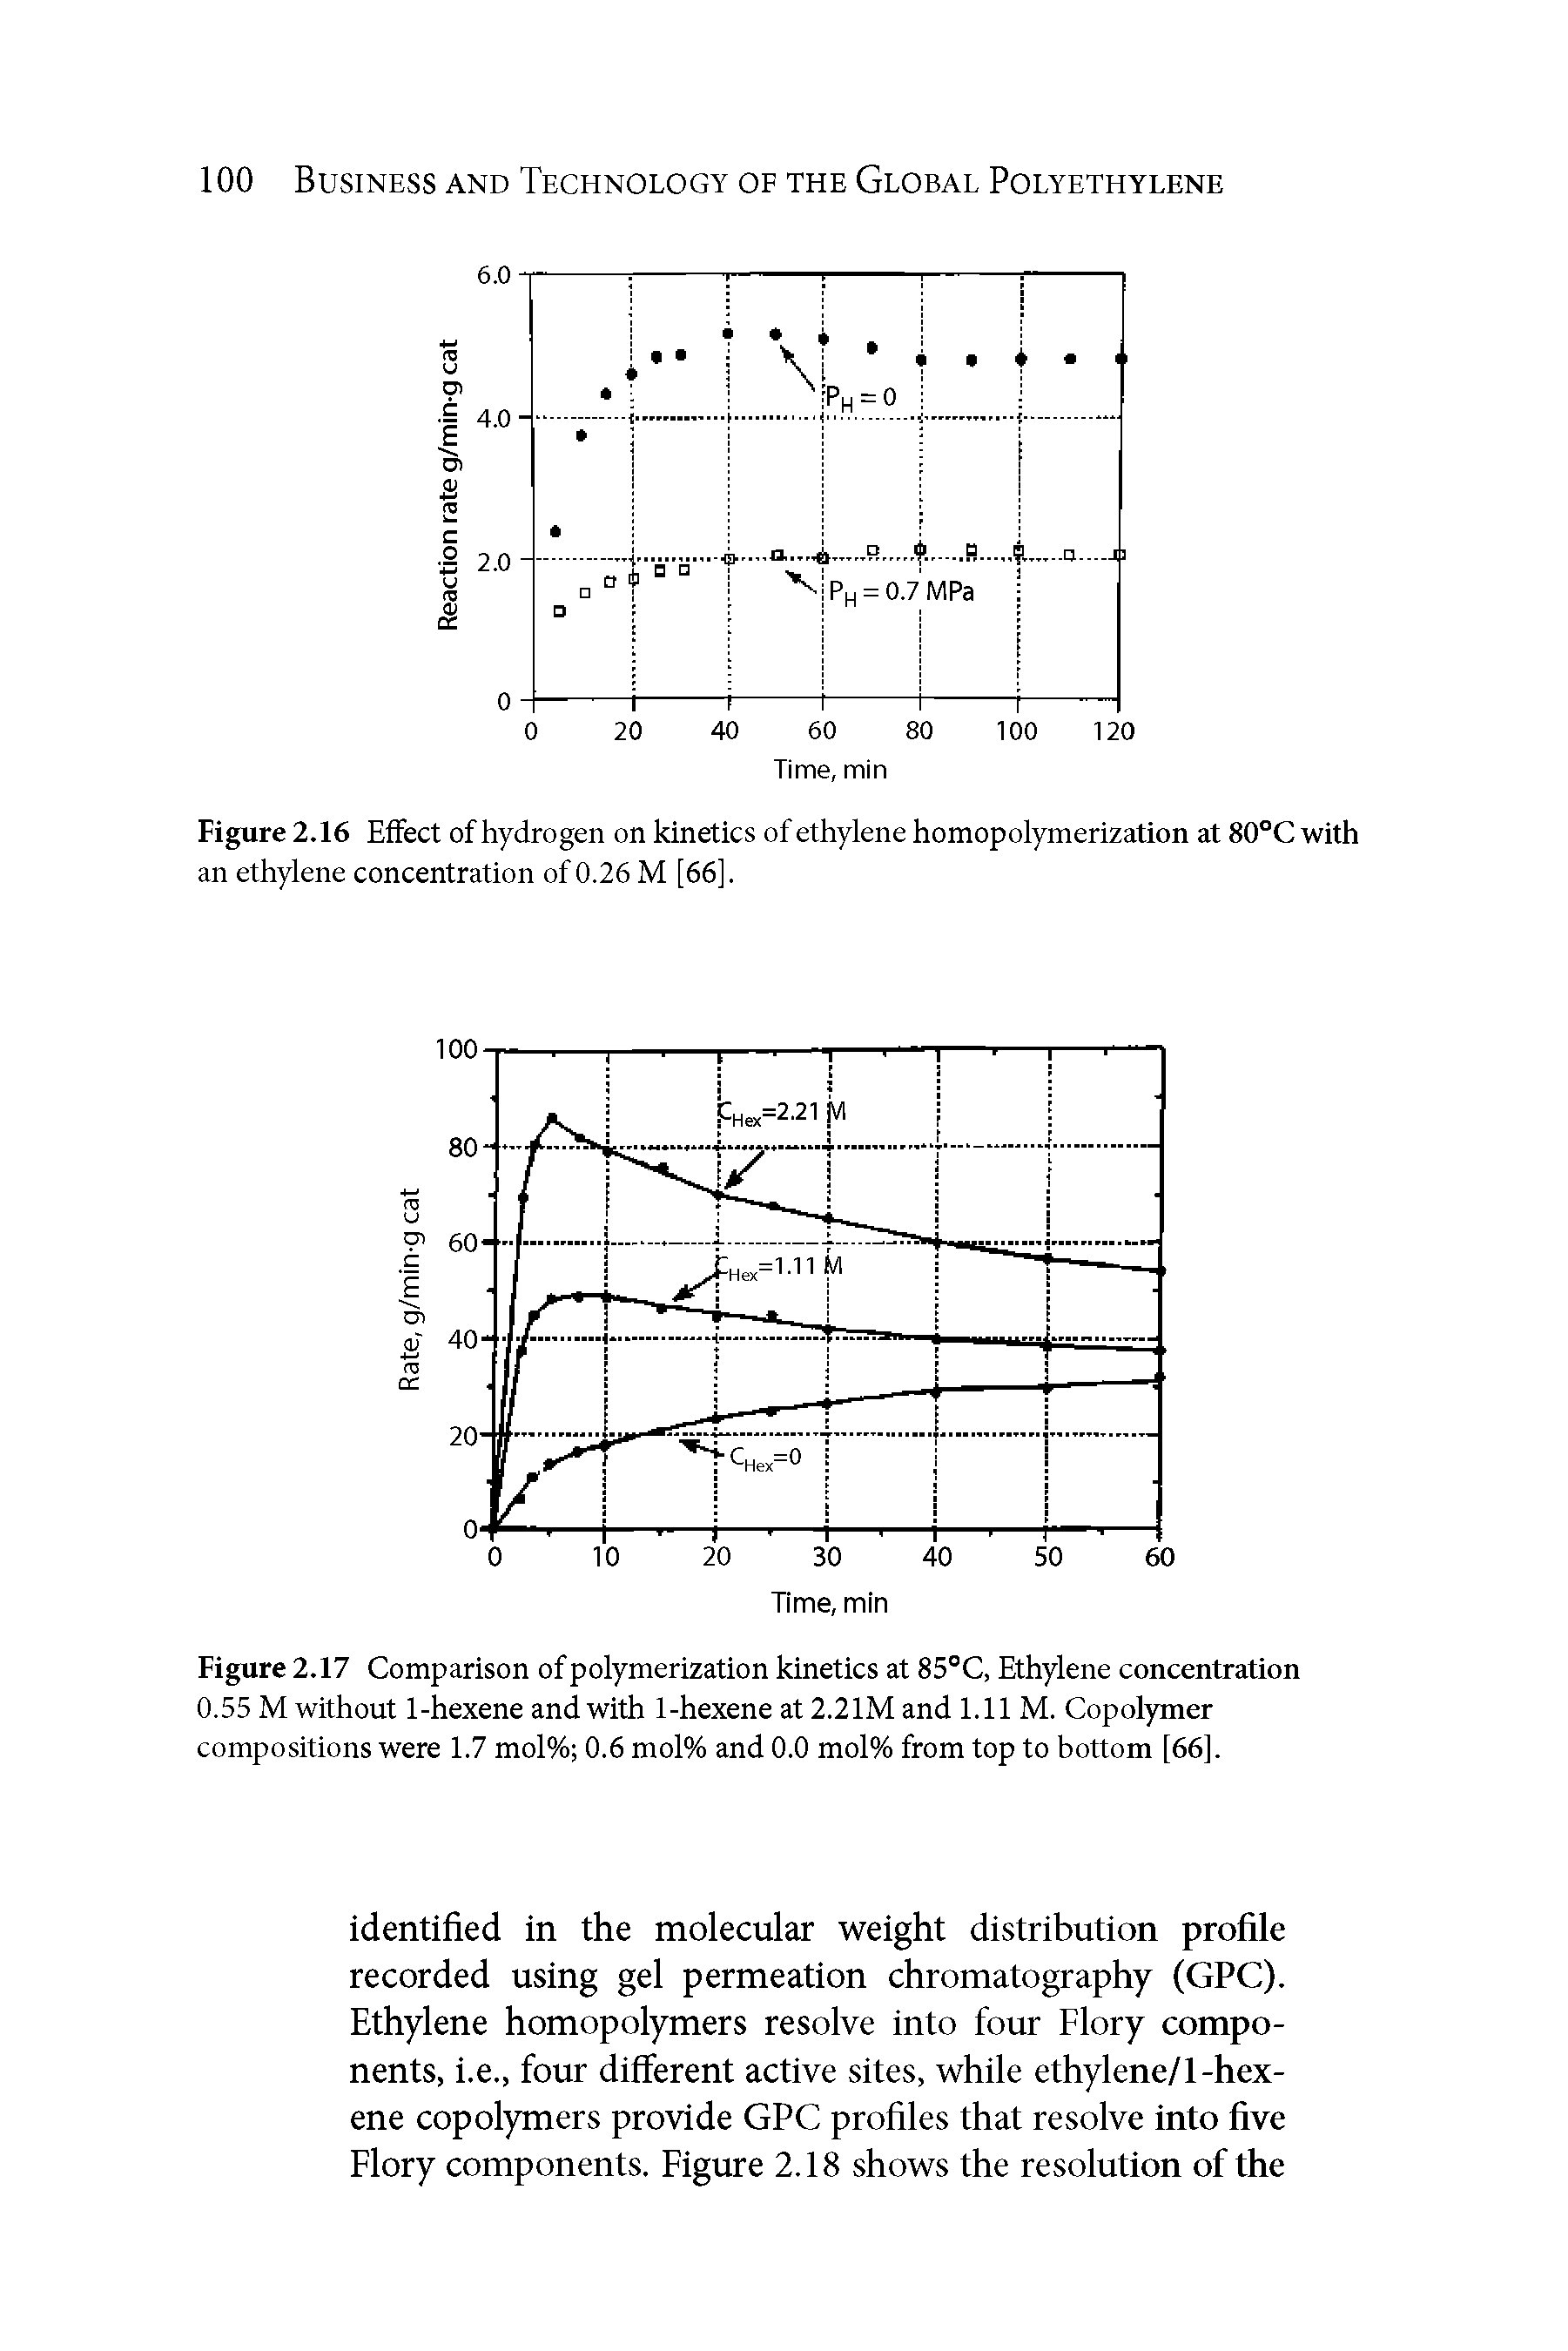 Figure 2.17 Comparison of polymerization kinetics at 85°C, Ethylene concentration 0.55 M without 1-hexene and with 1-hexene at 2.21Mand 1.11 M. Copolymer compositions were 1.7 mol% 0.6 mol% and 0.0 mol% from top to bottom [66],...